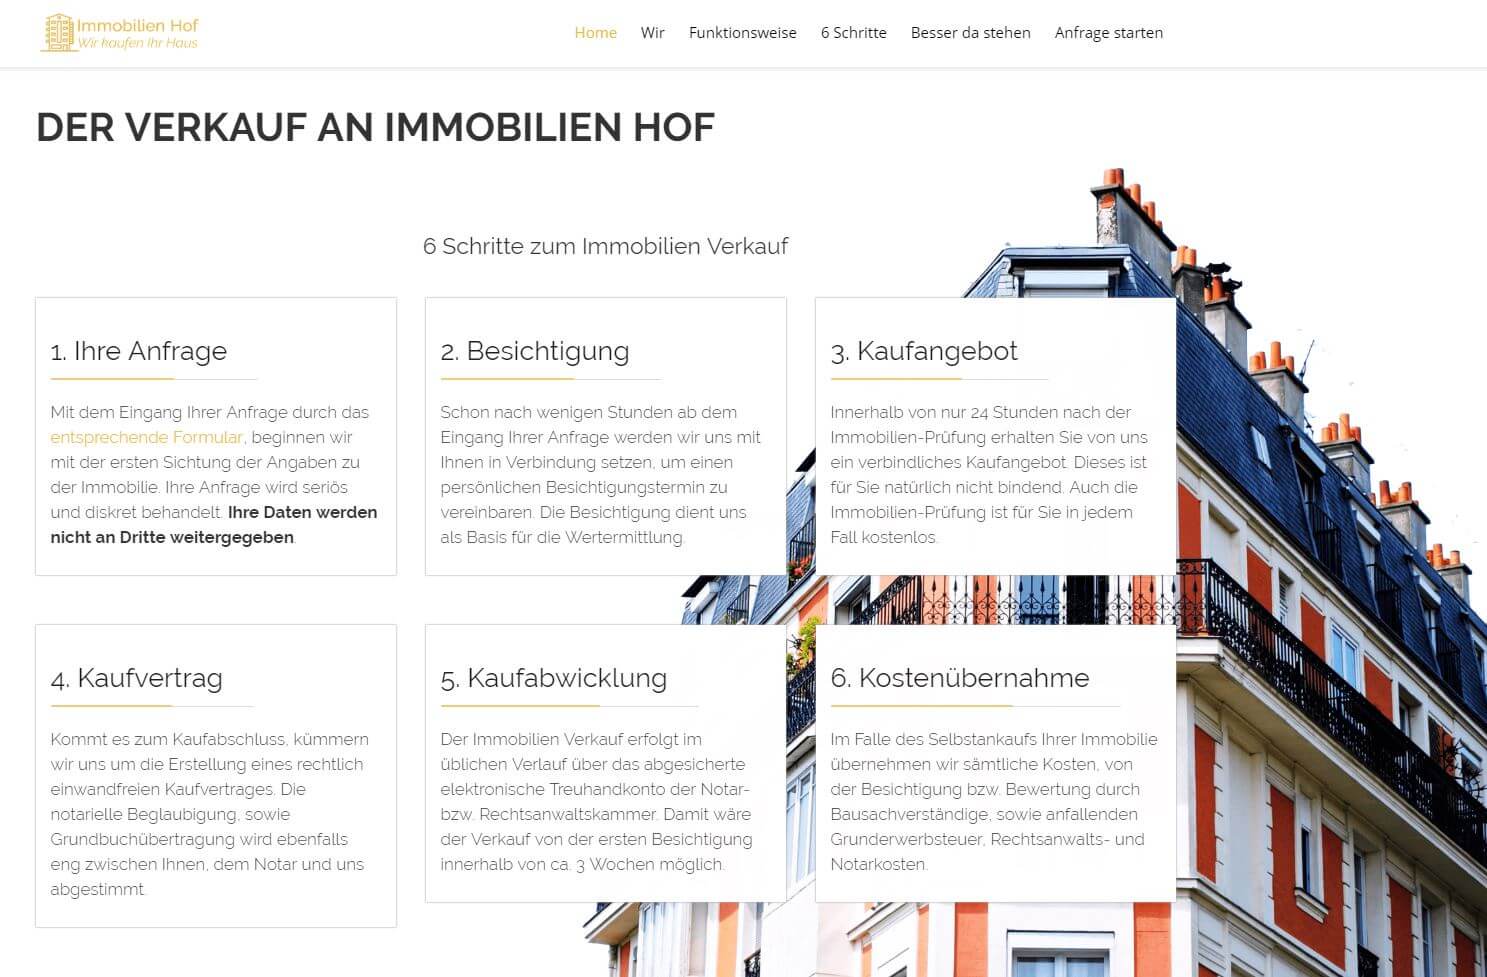 immobilien hof funktionsweise